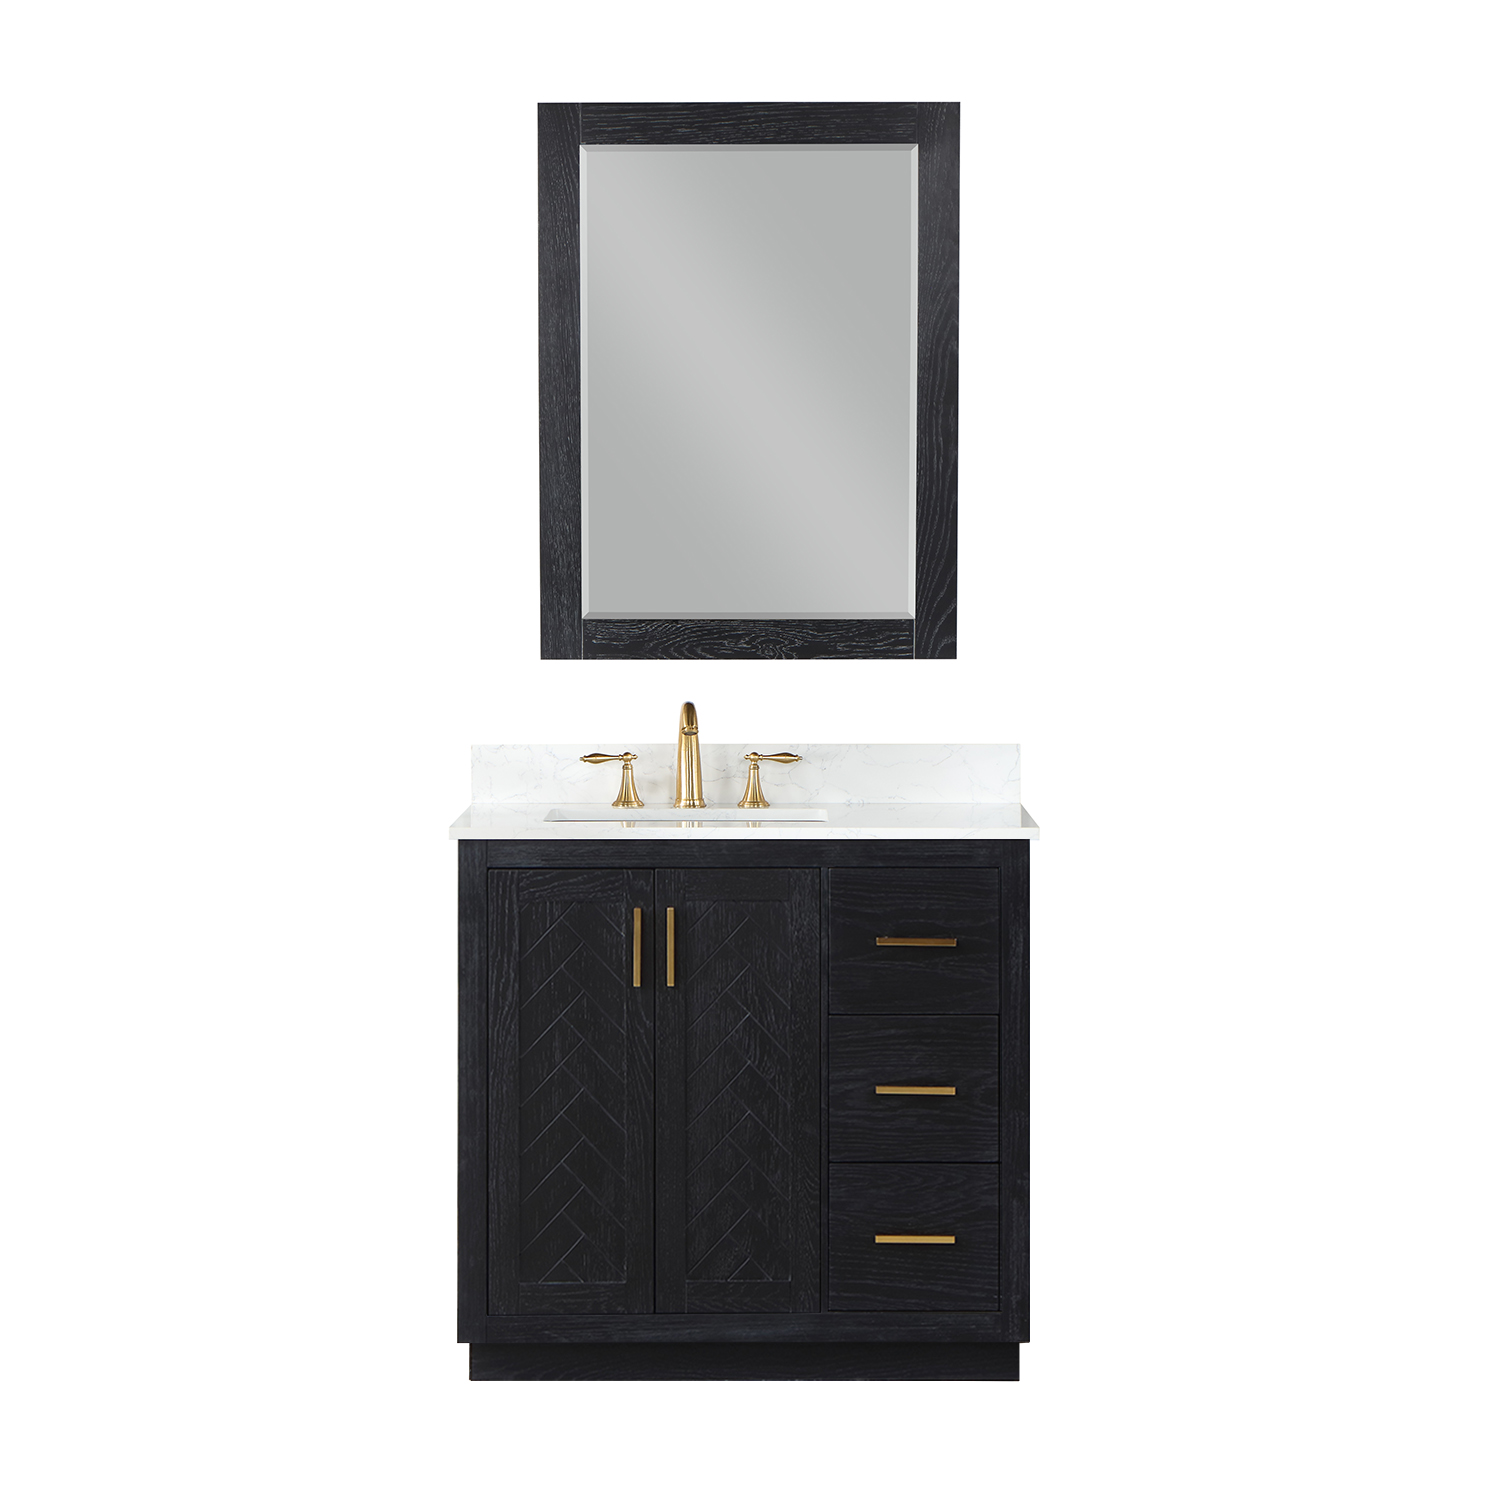 Issac Edwards Collection 36" Single Bathroom Vanity Set in Black Oak with Grain White Composite Stone Countertop without Mirror 